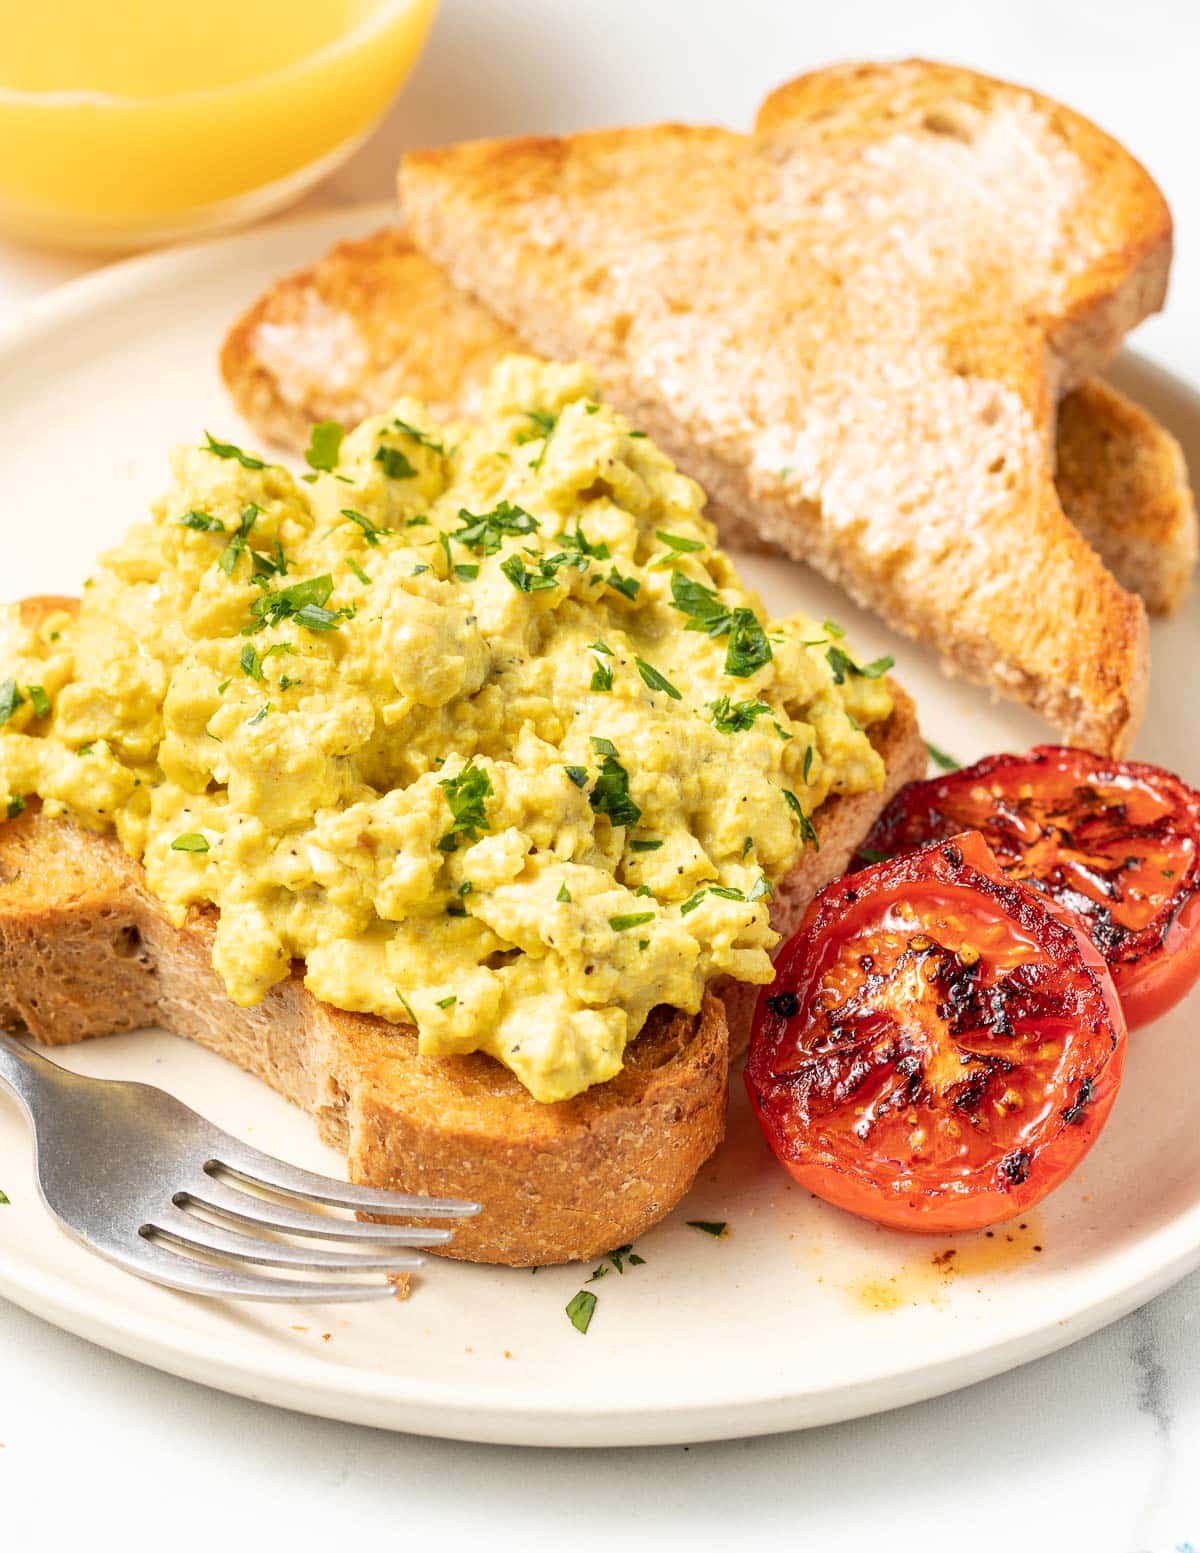 a place of vegan scrambled eggs with tomatoes and a glass of orange juice